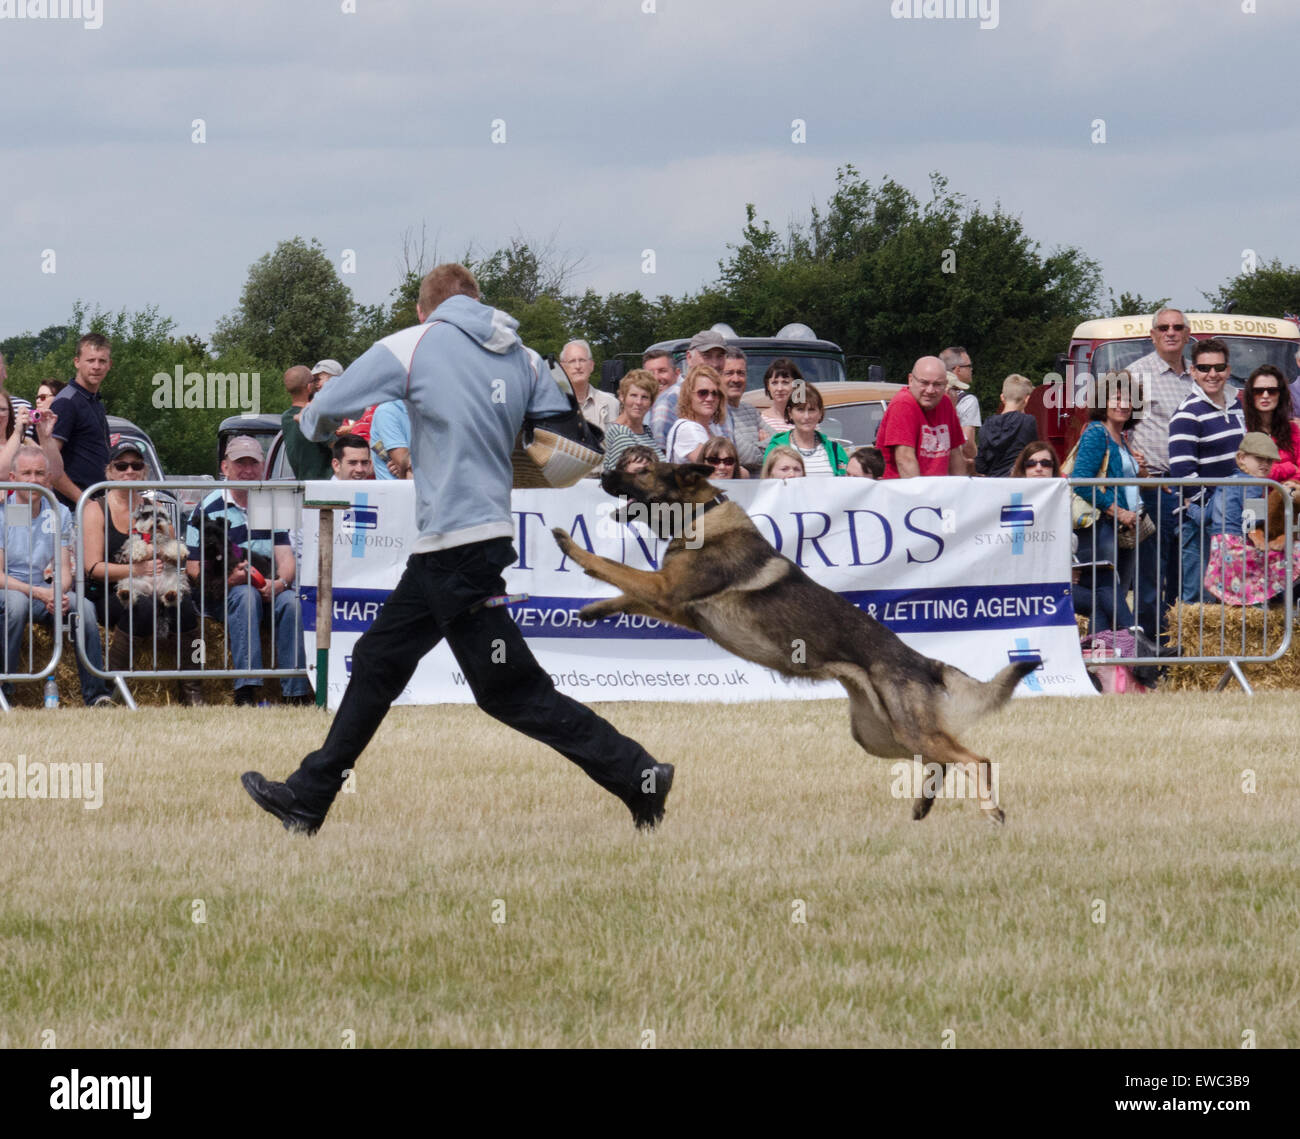 Essex Police Dog Unit on display at the Blackwater Country Show UK June 2015 Stock Photo